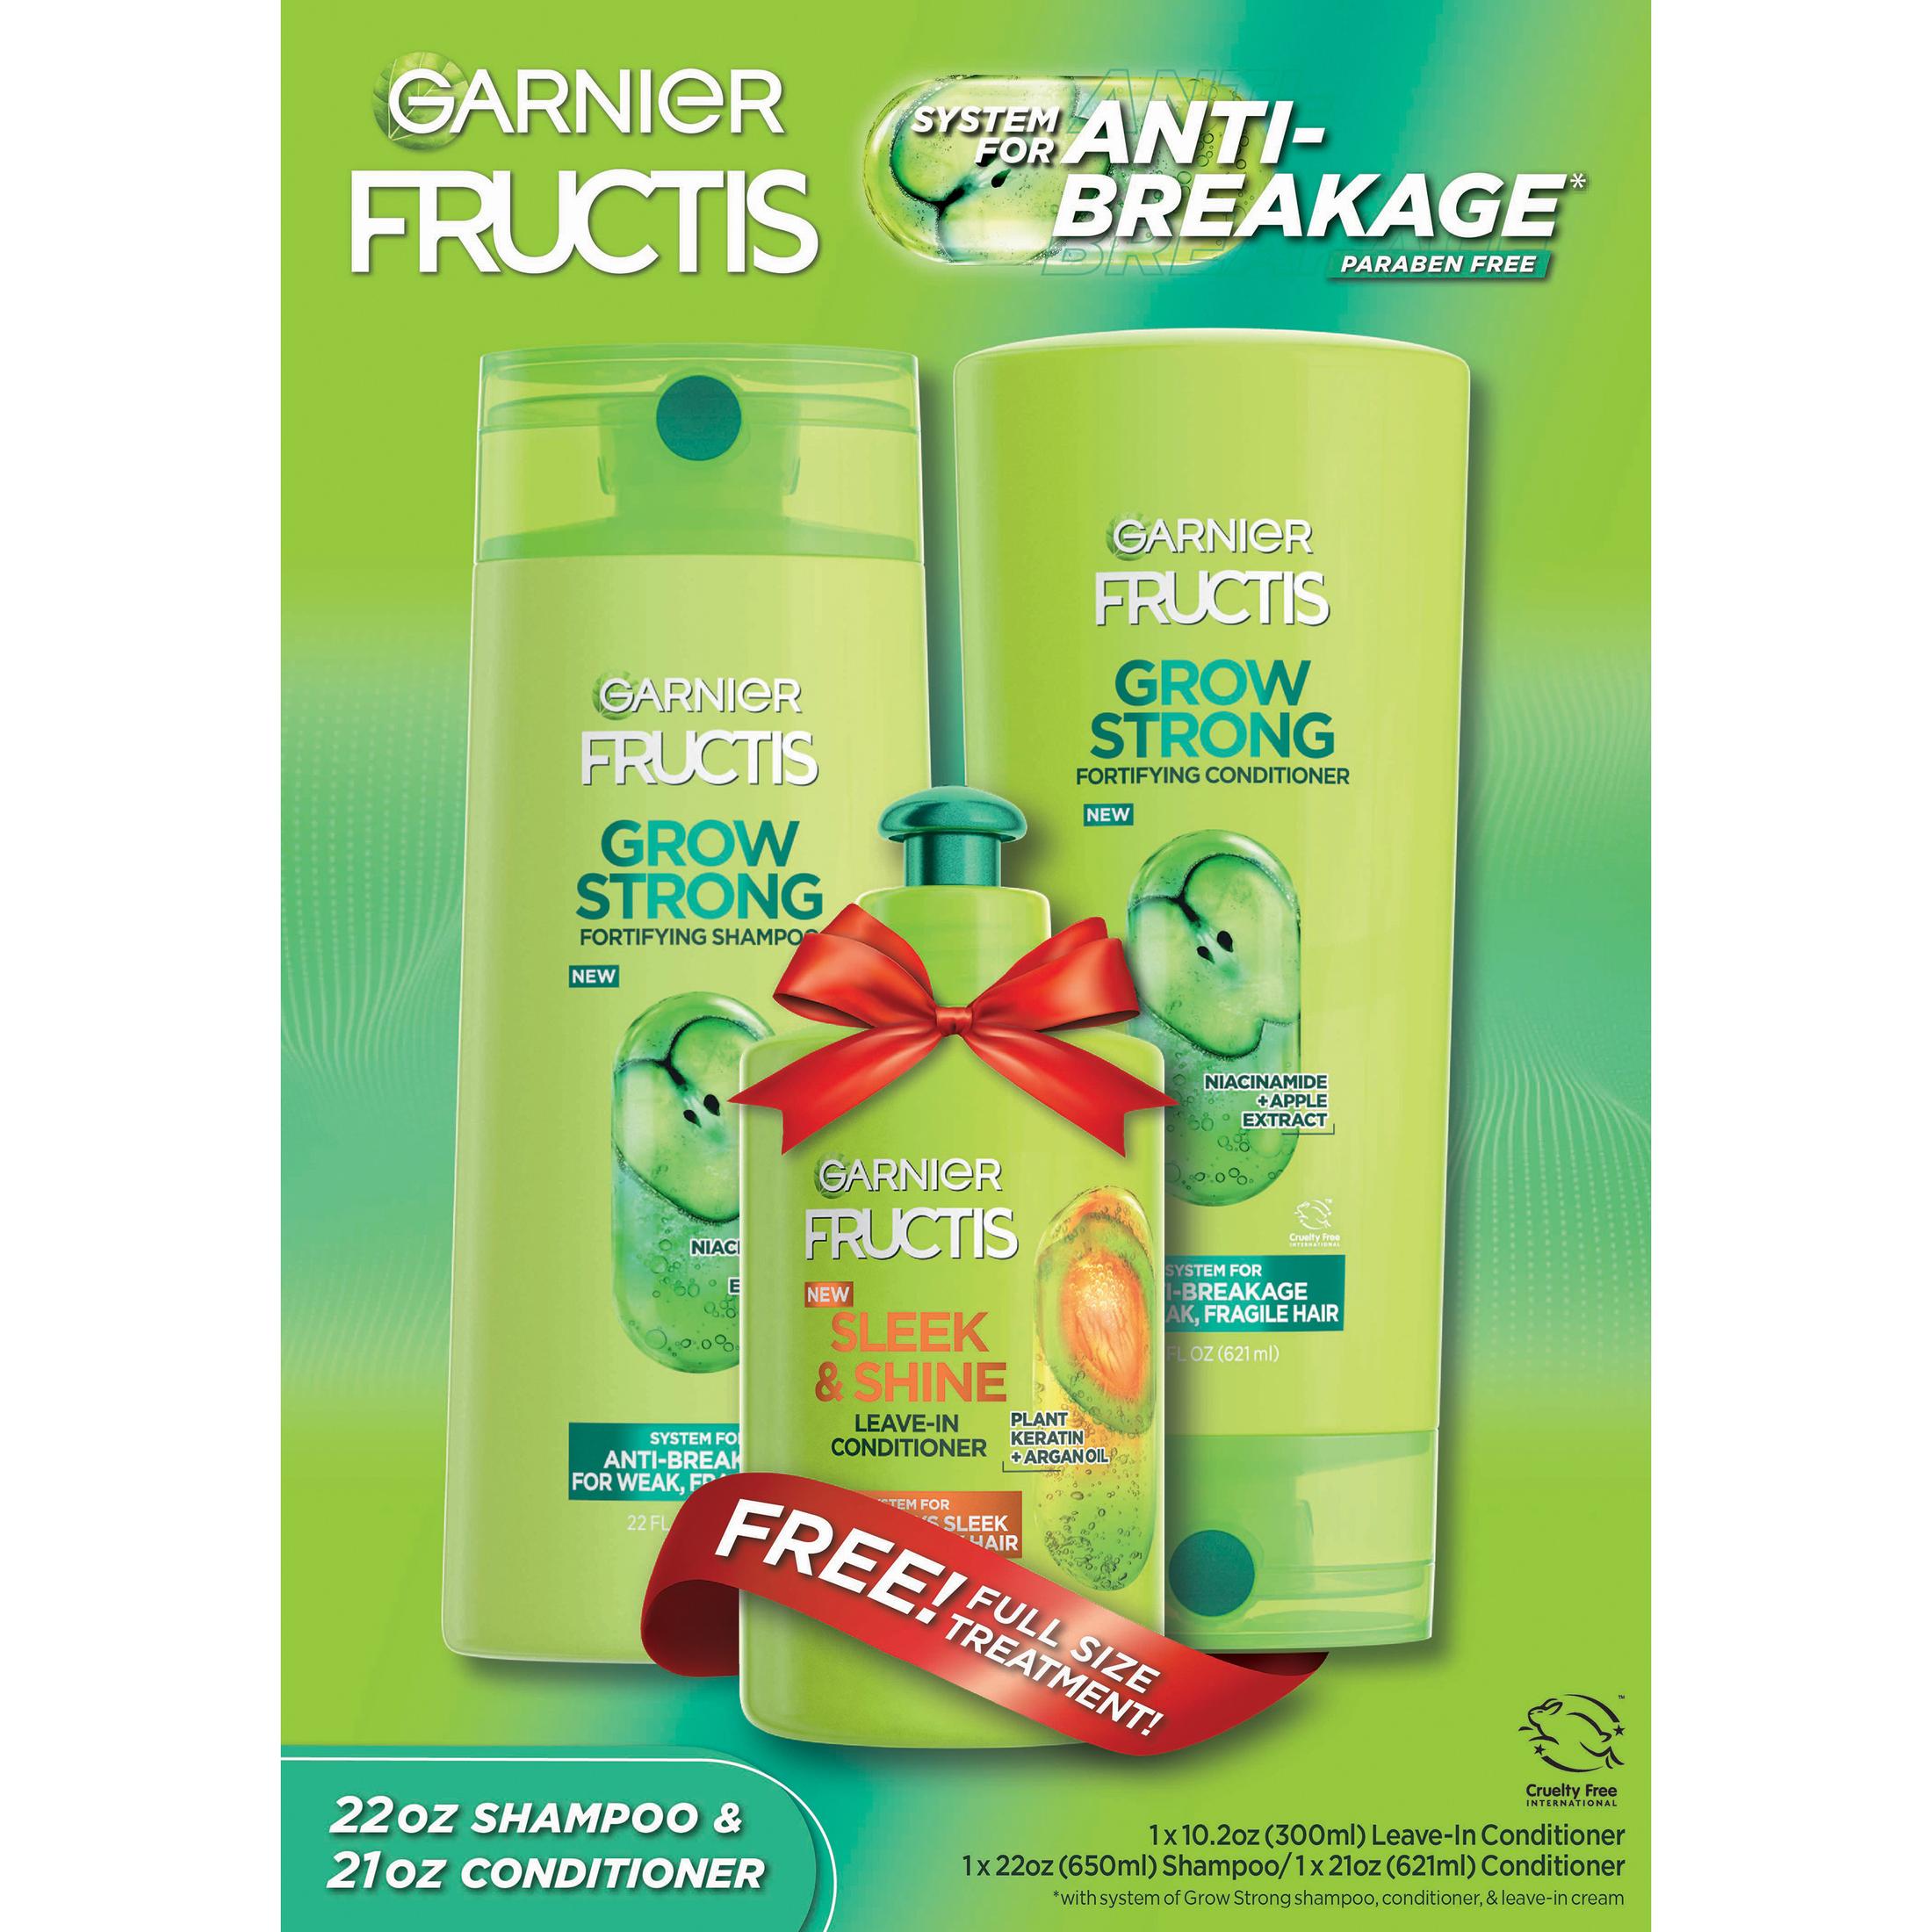 ($16 Value) Garnier Fructis Grow Strong Shampoo Conditioner and Treatment Gift Set, Holiday Kit - image 3 of 4